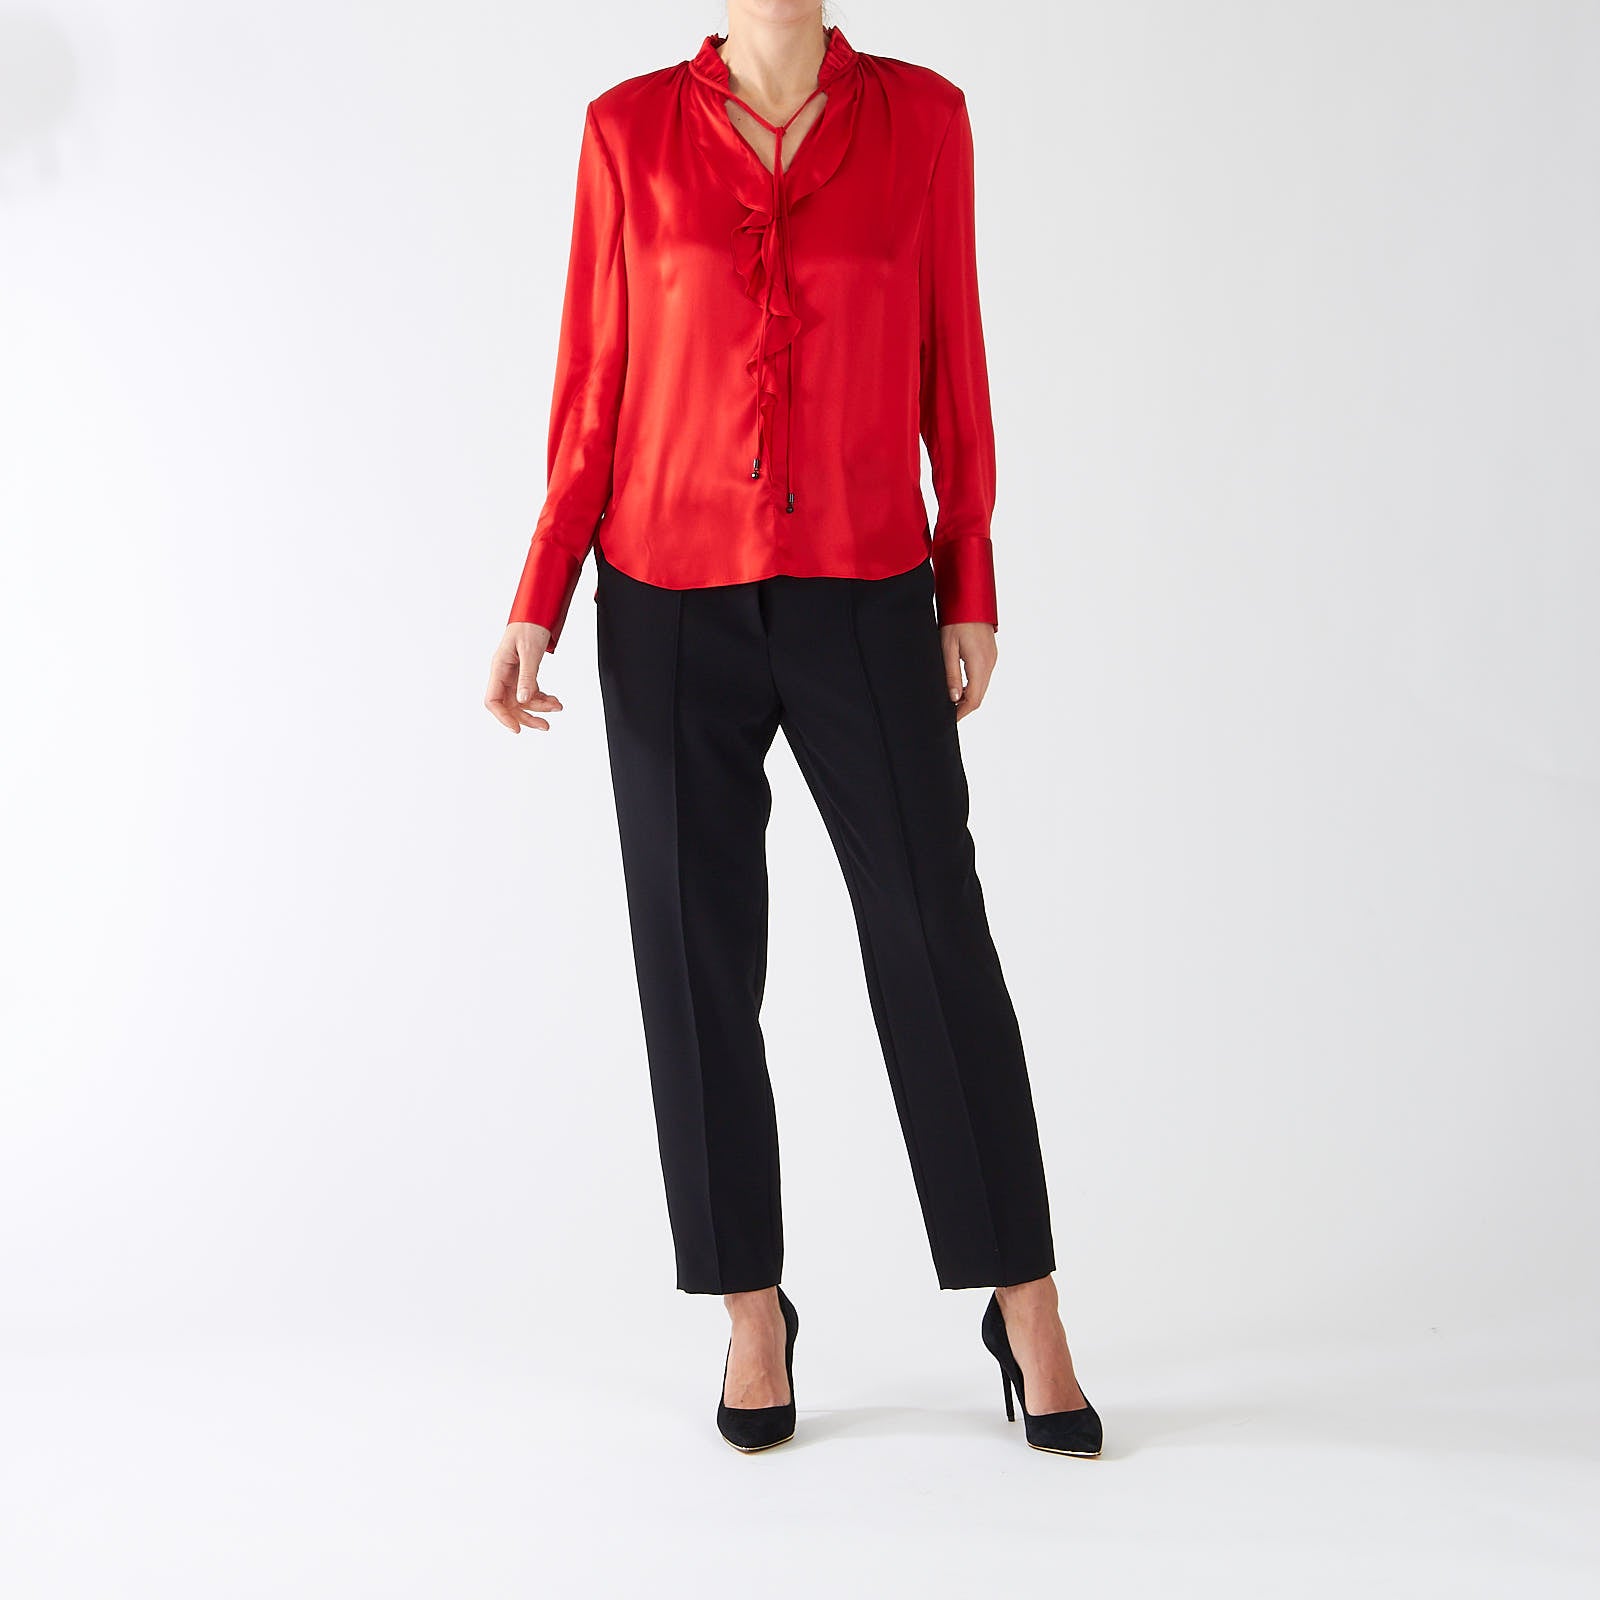 Bright Fire Red Silk Frill Blouse